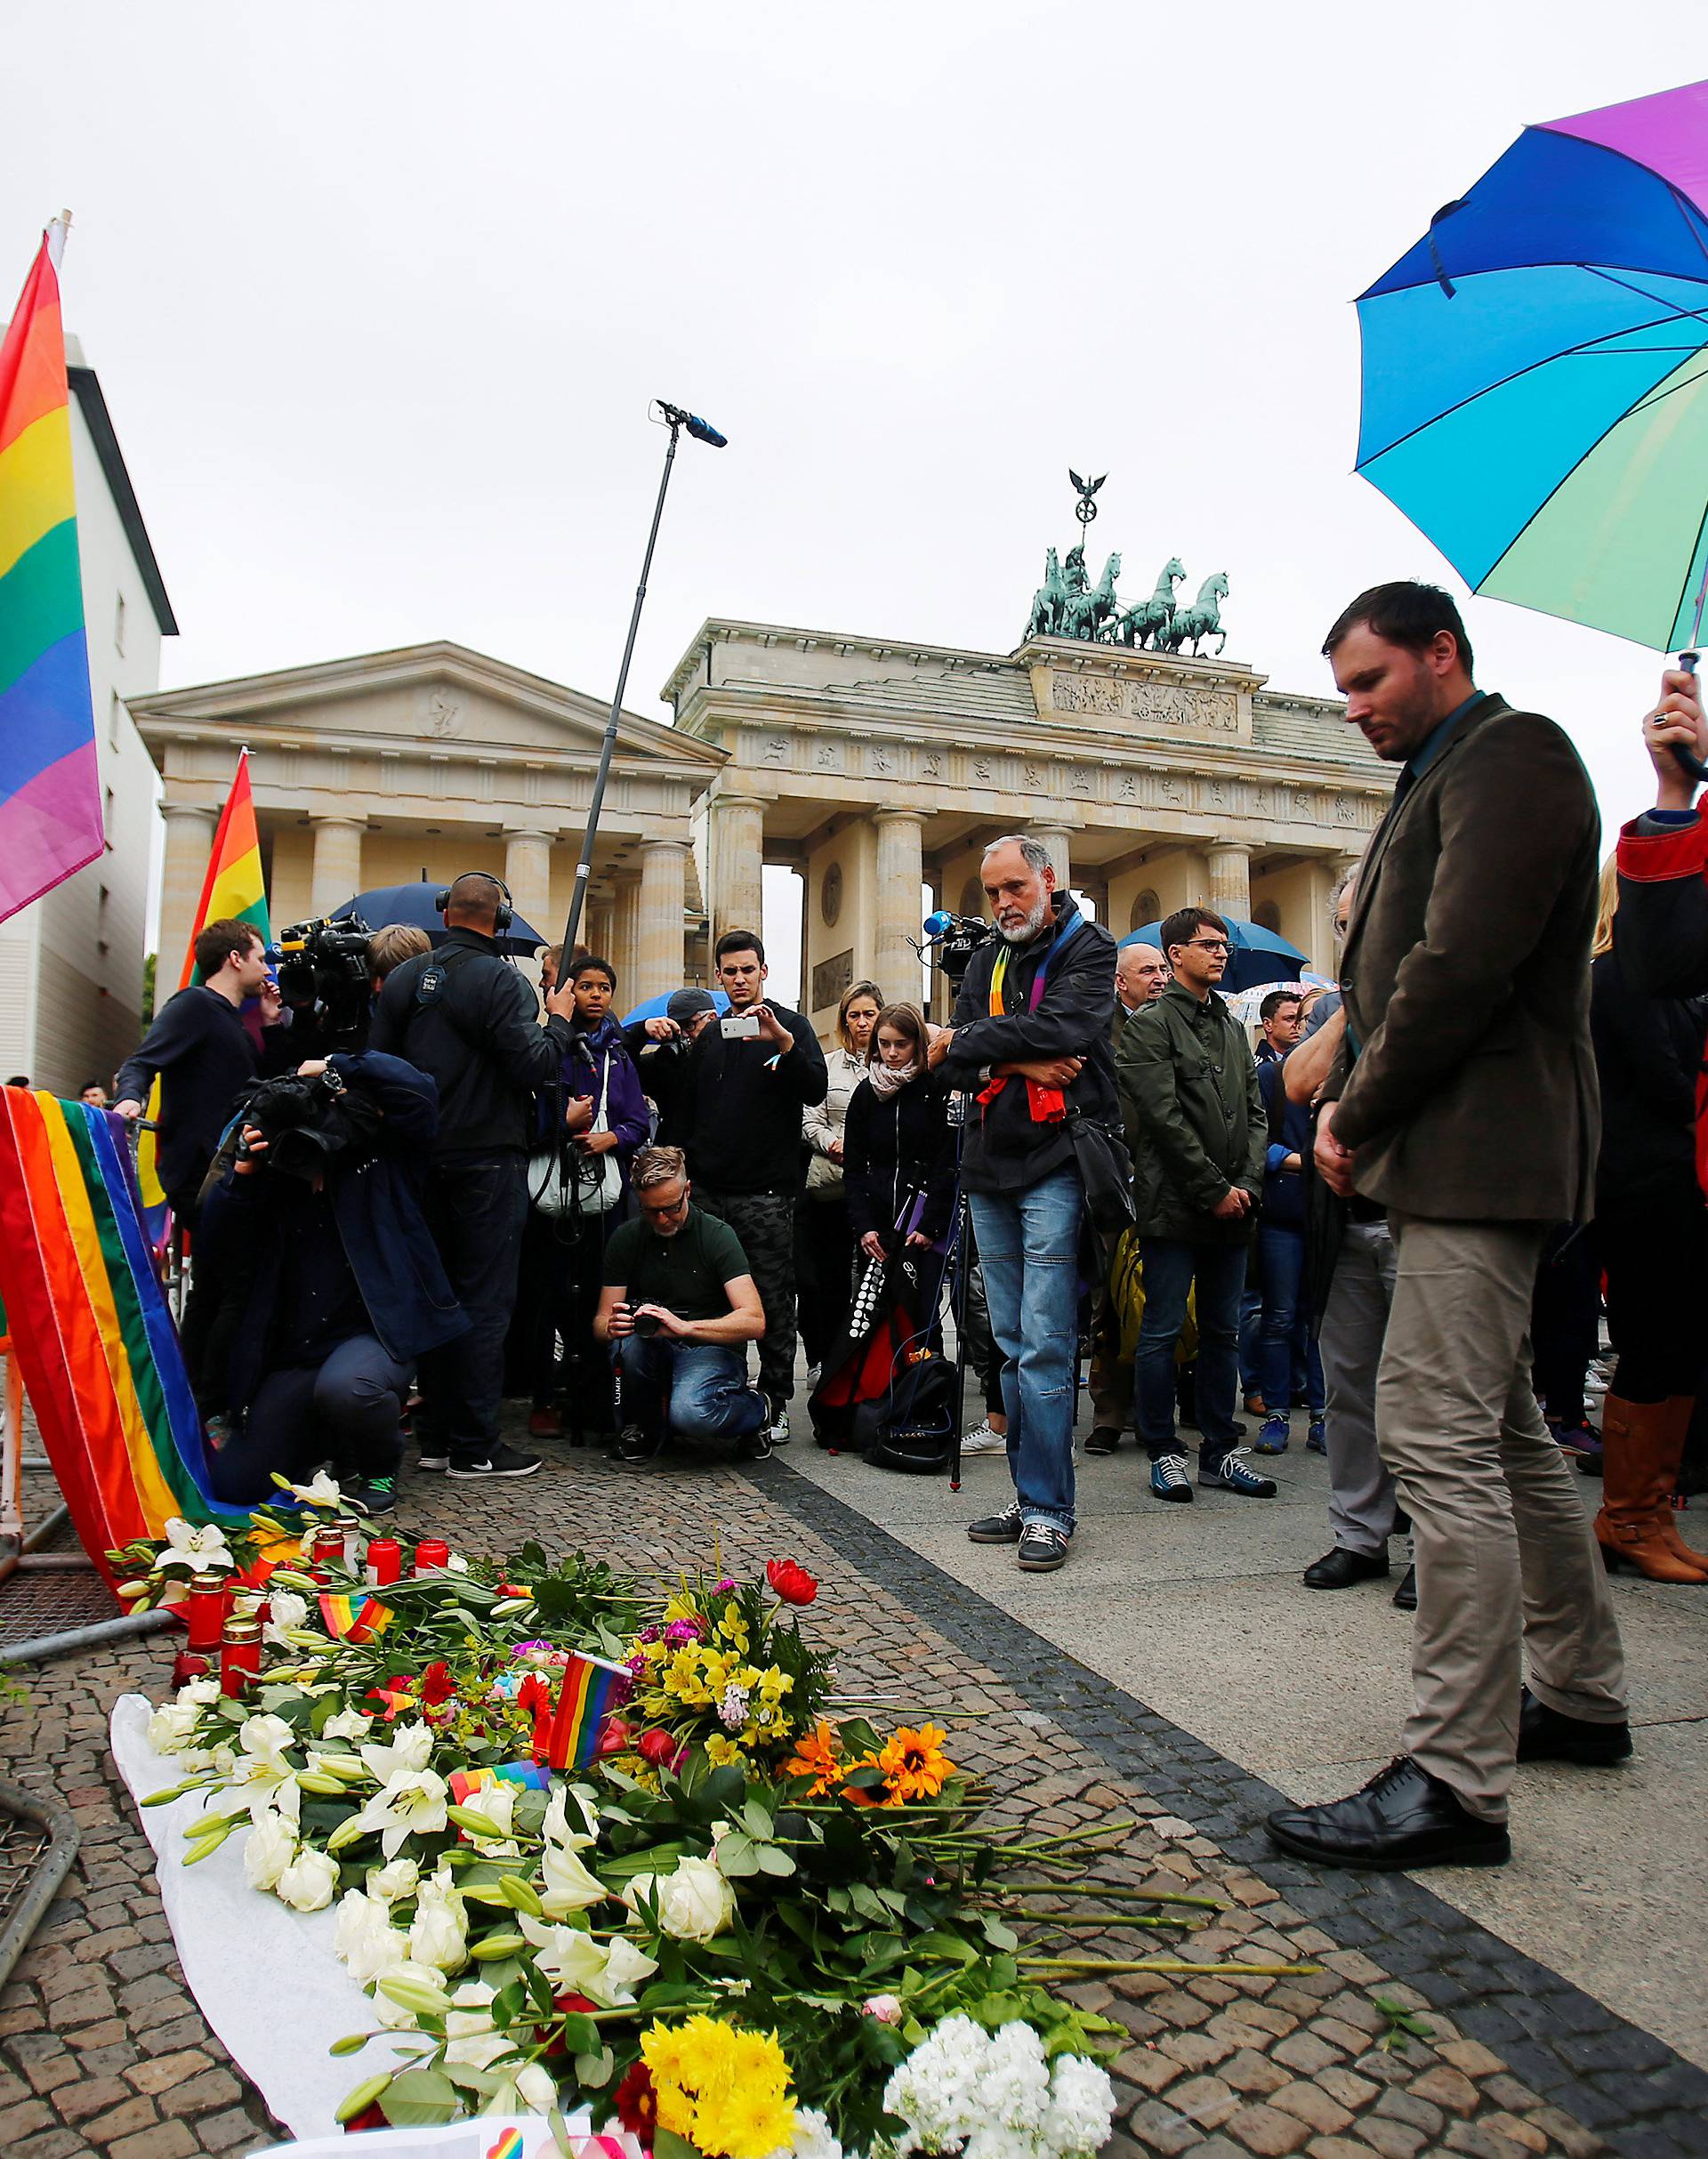 A man places a candle for the victims of the shooting at a gay nightclub in Orlando in front of the U.S. Embassy and Brandenburg gate in Berlin